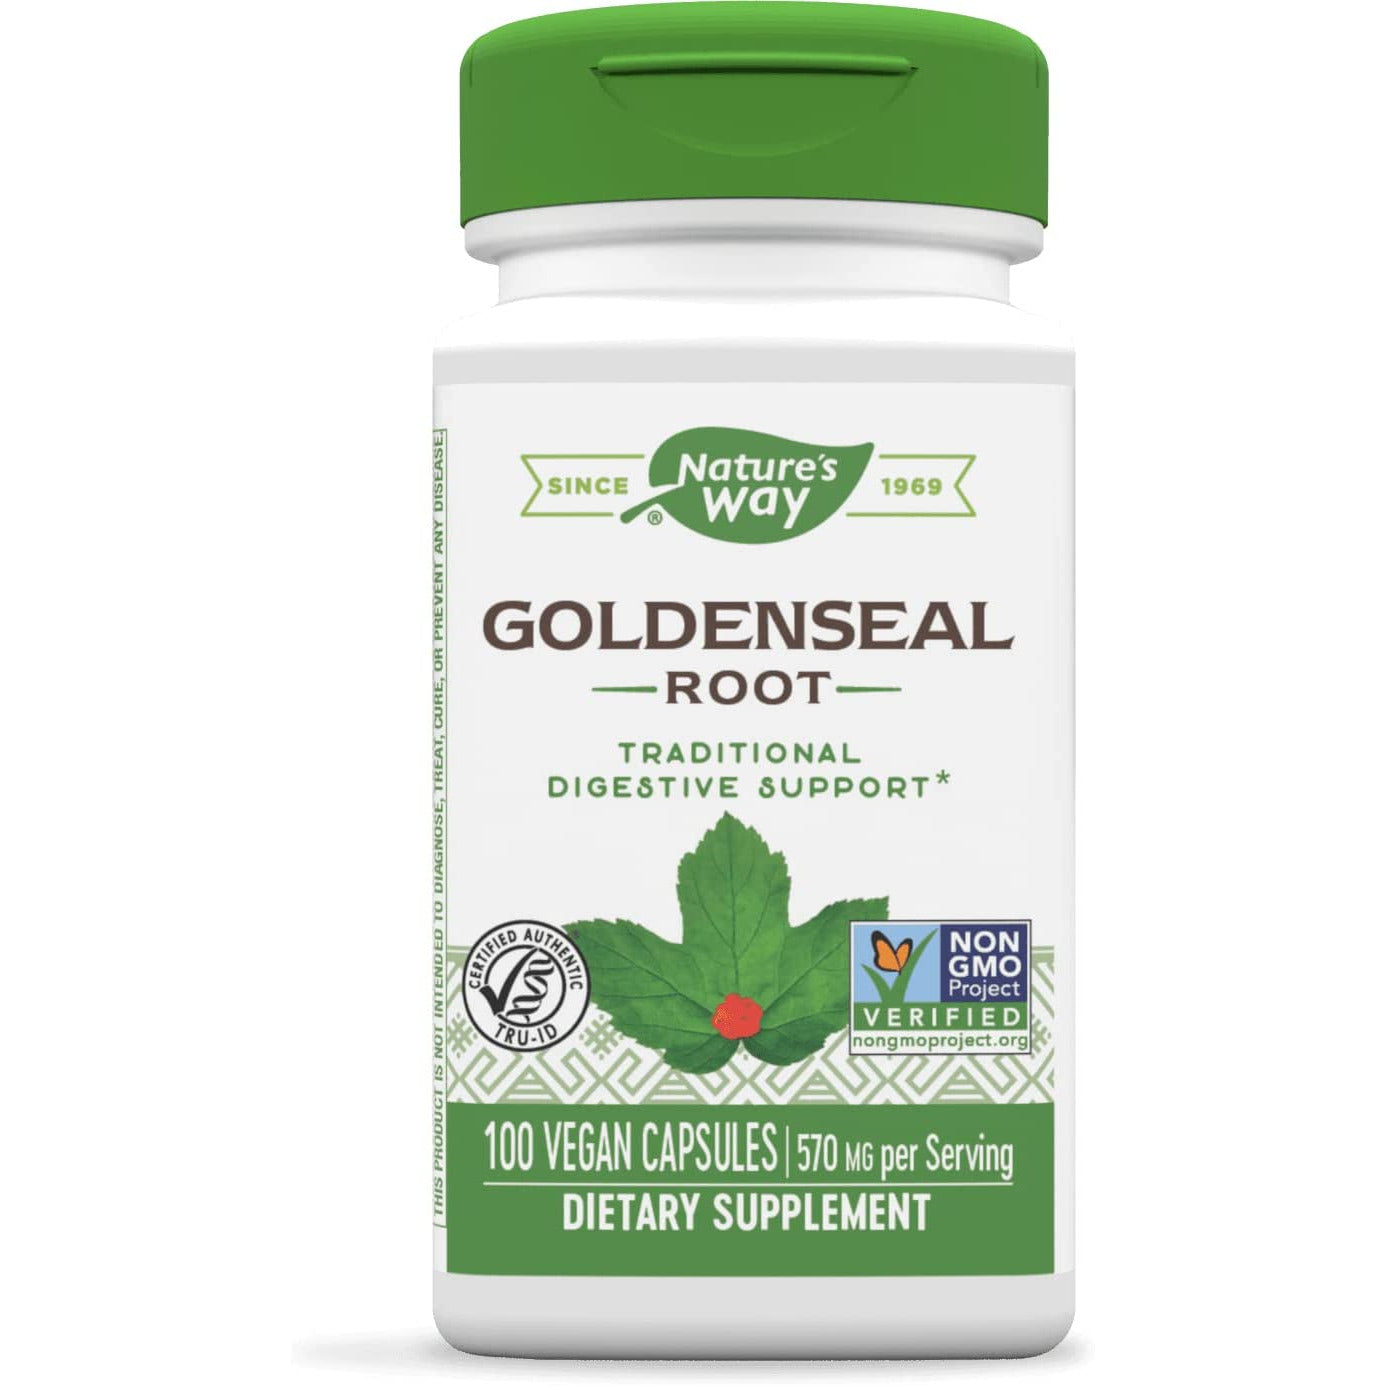 Nature’s Way Goldenseal Root, Traditional Digestive Support*